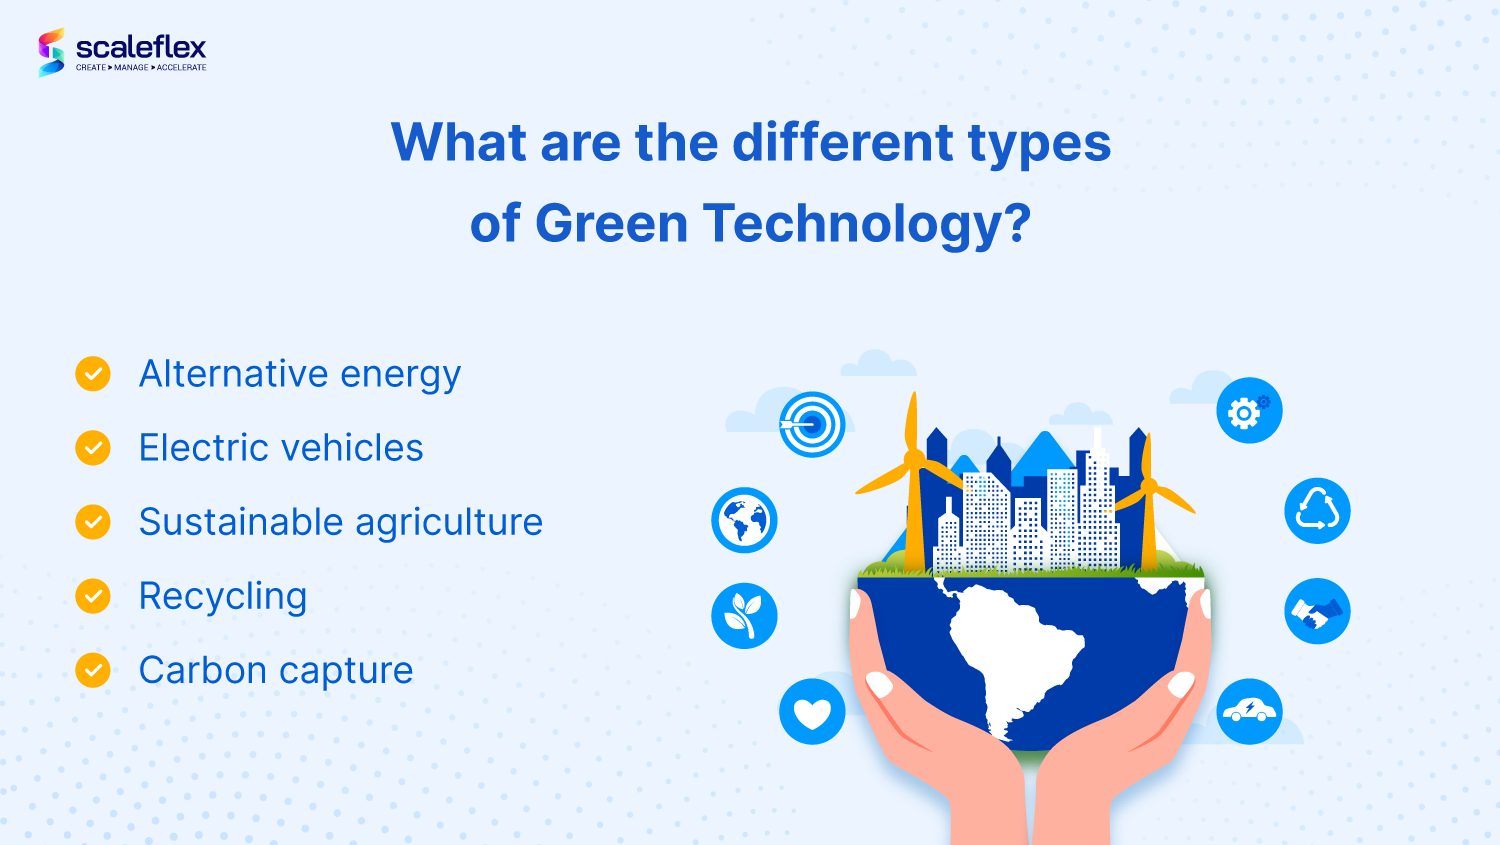 What are the types of green technology?